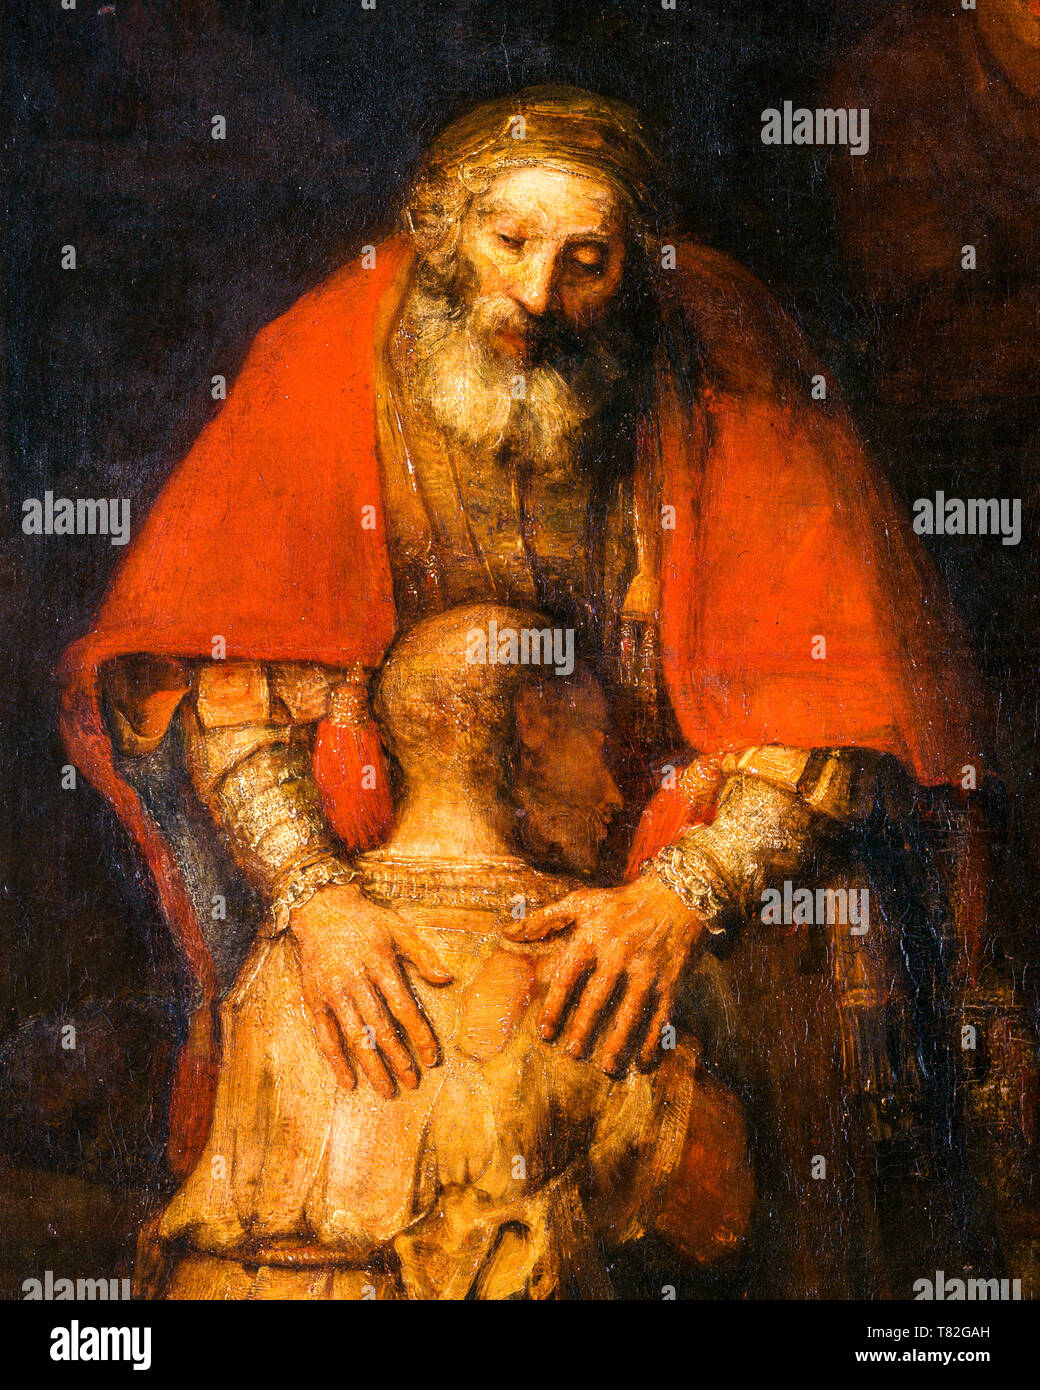 The Return of the Prodigal Son, painting (detail), c. 1668 by Rembrandt Stock Photo